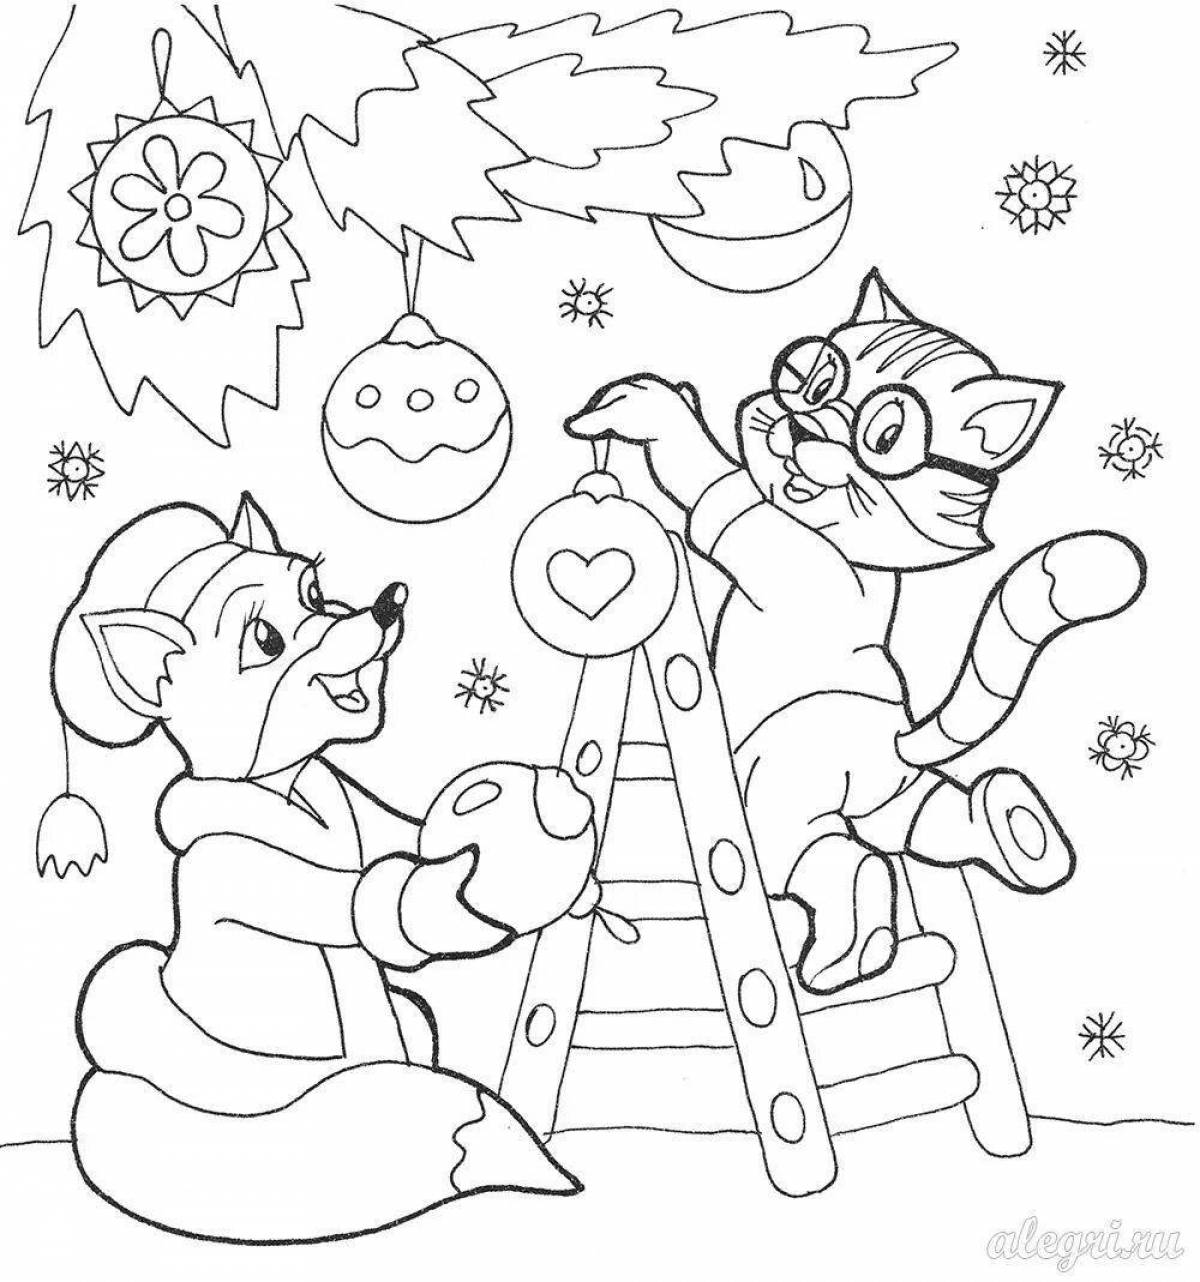 Fantastic Christmas coloring book for kids